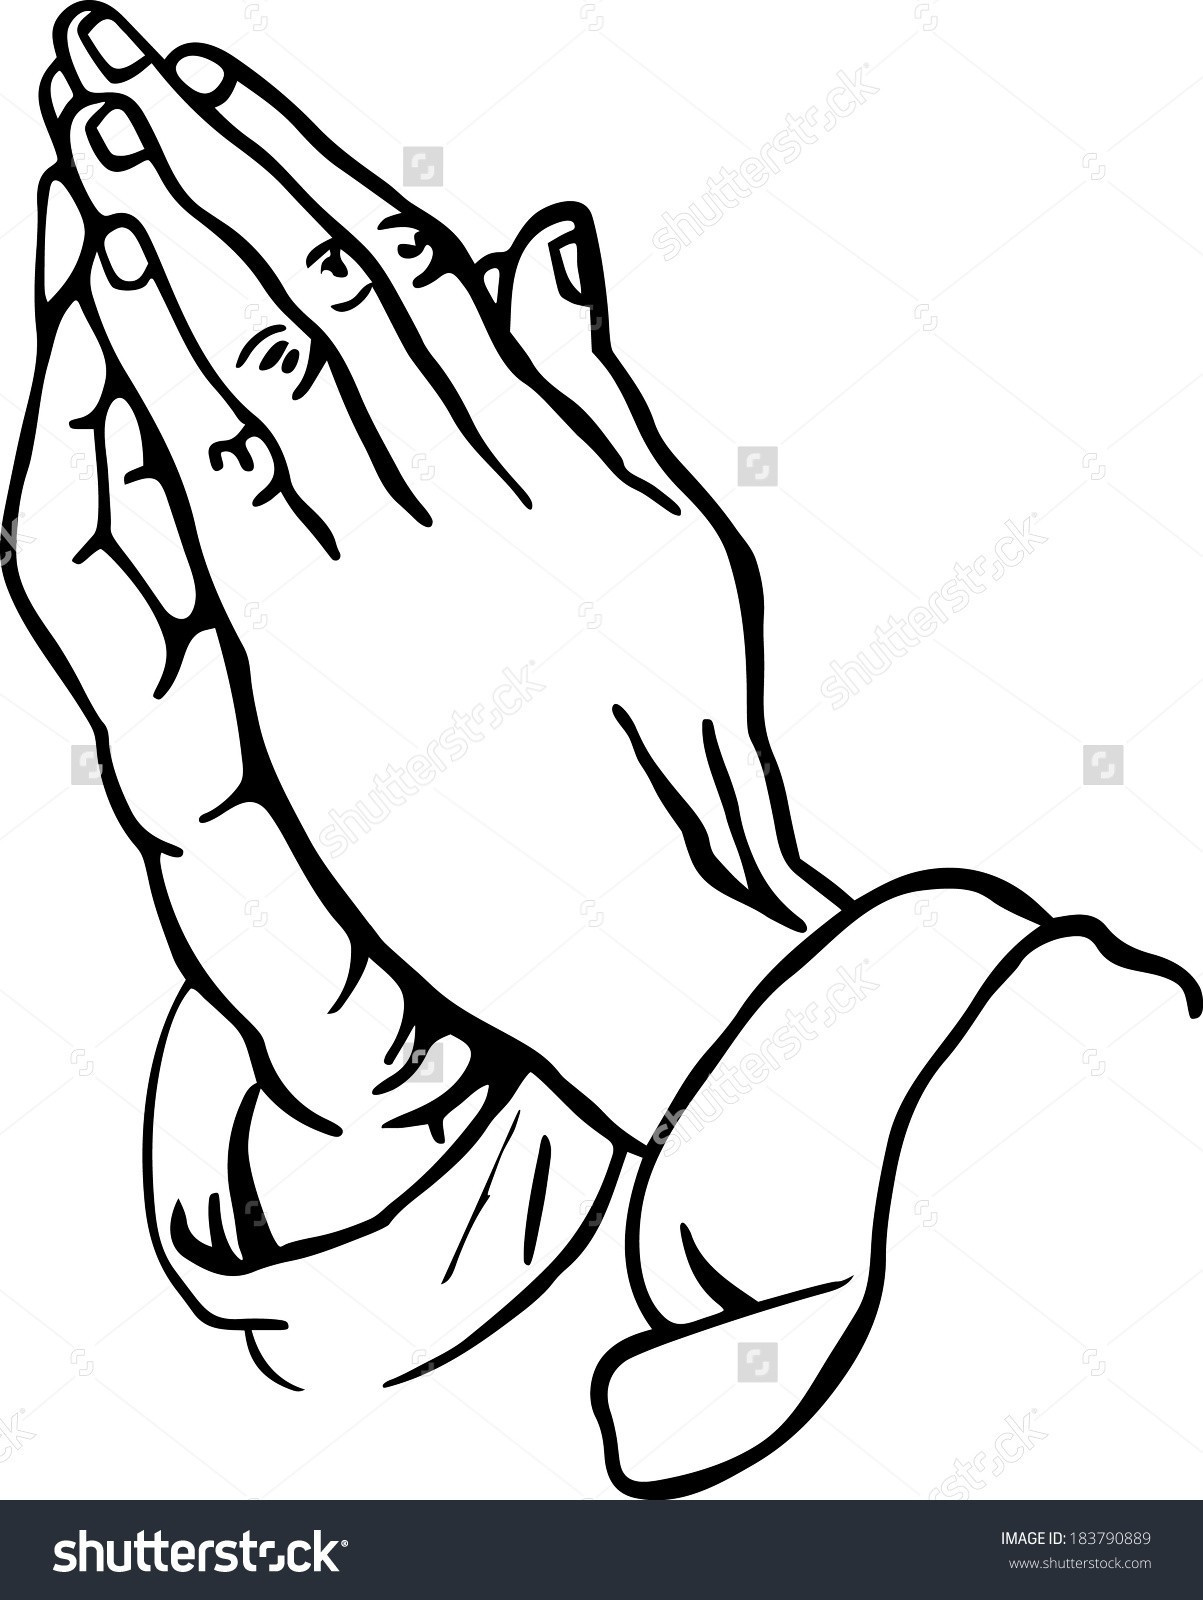 Prayer Hands Coloring Pages
 Hands Prayer Coloring Page thekindproject